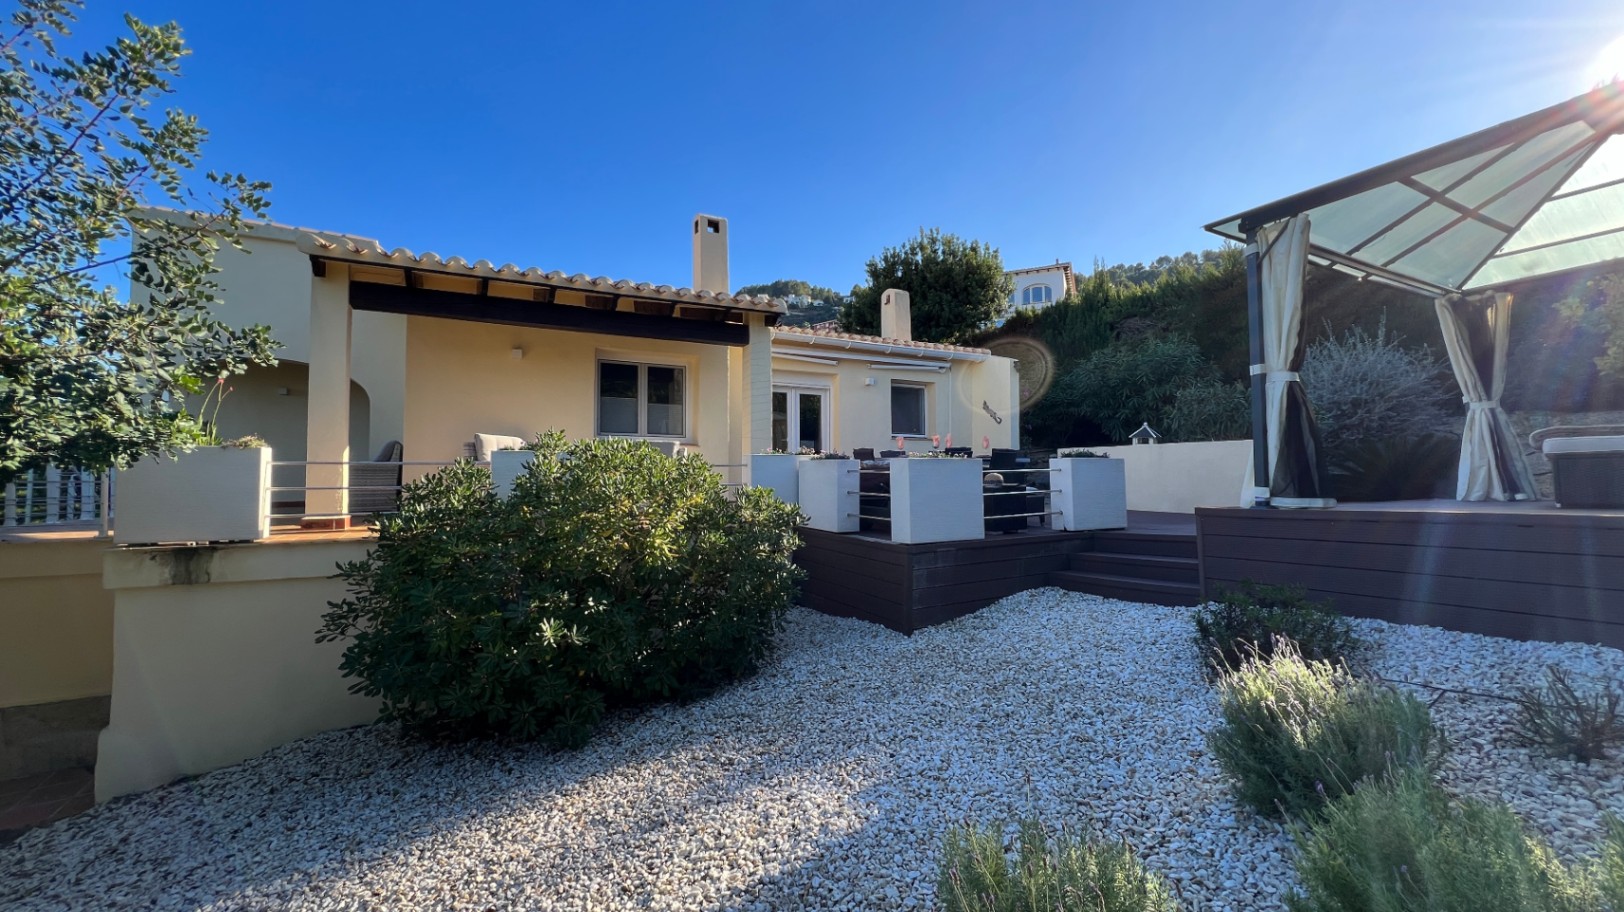 Beautifully renovated detached villa with private garden, car park and roof terrace in La Sella